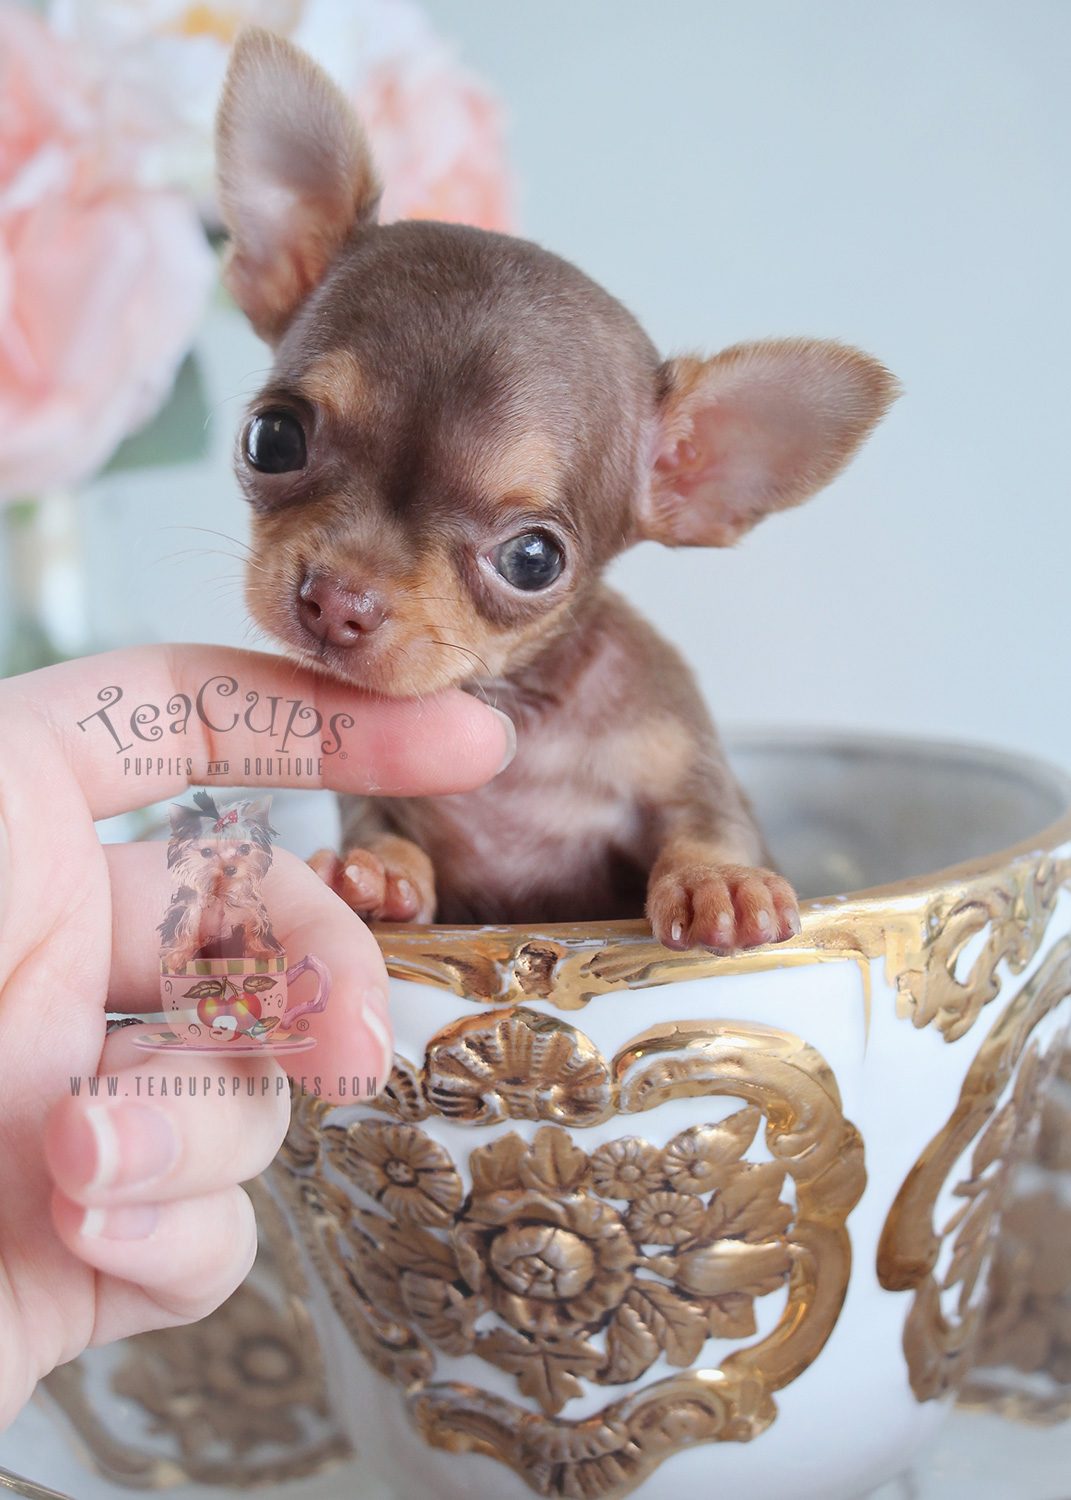 Teacup Chihuahua Puppies South Florida Teacup Puppies & Boutique